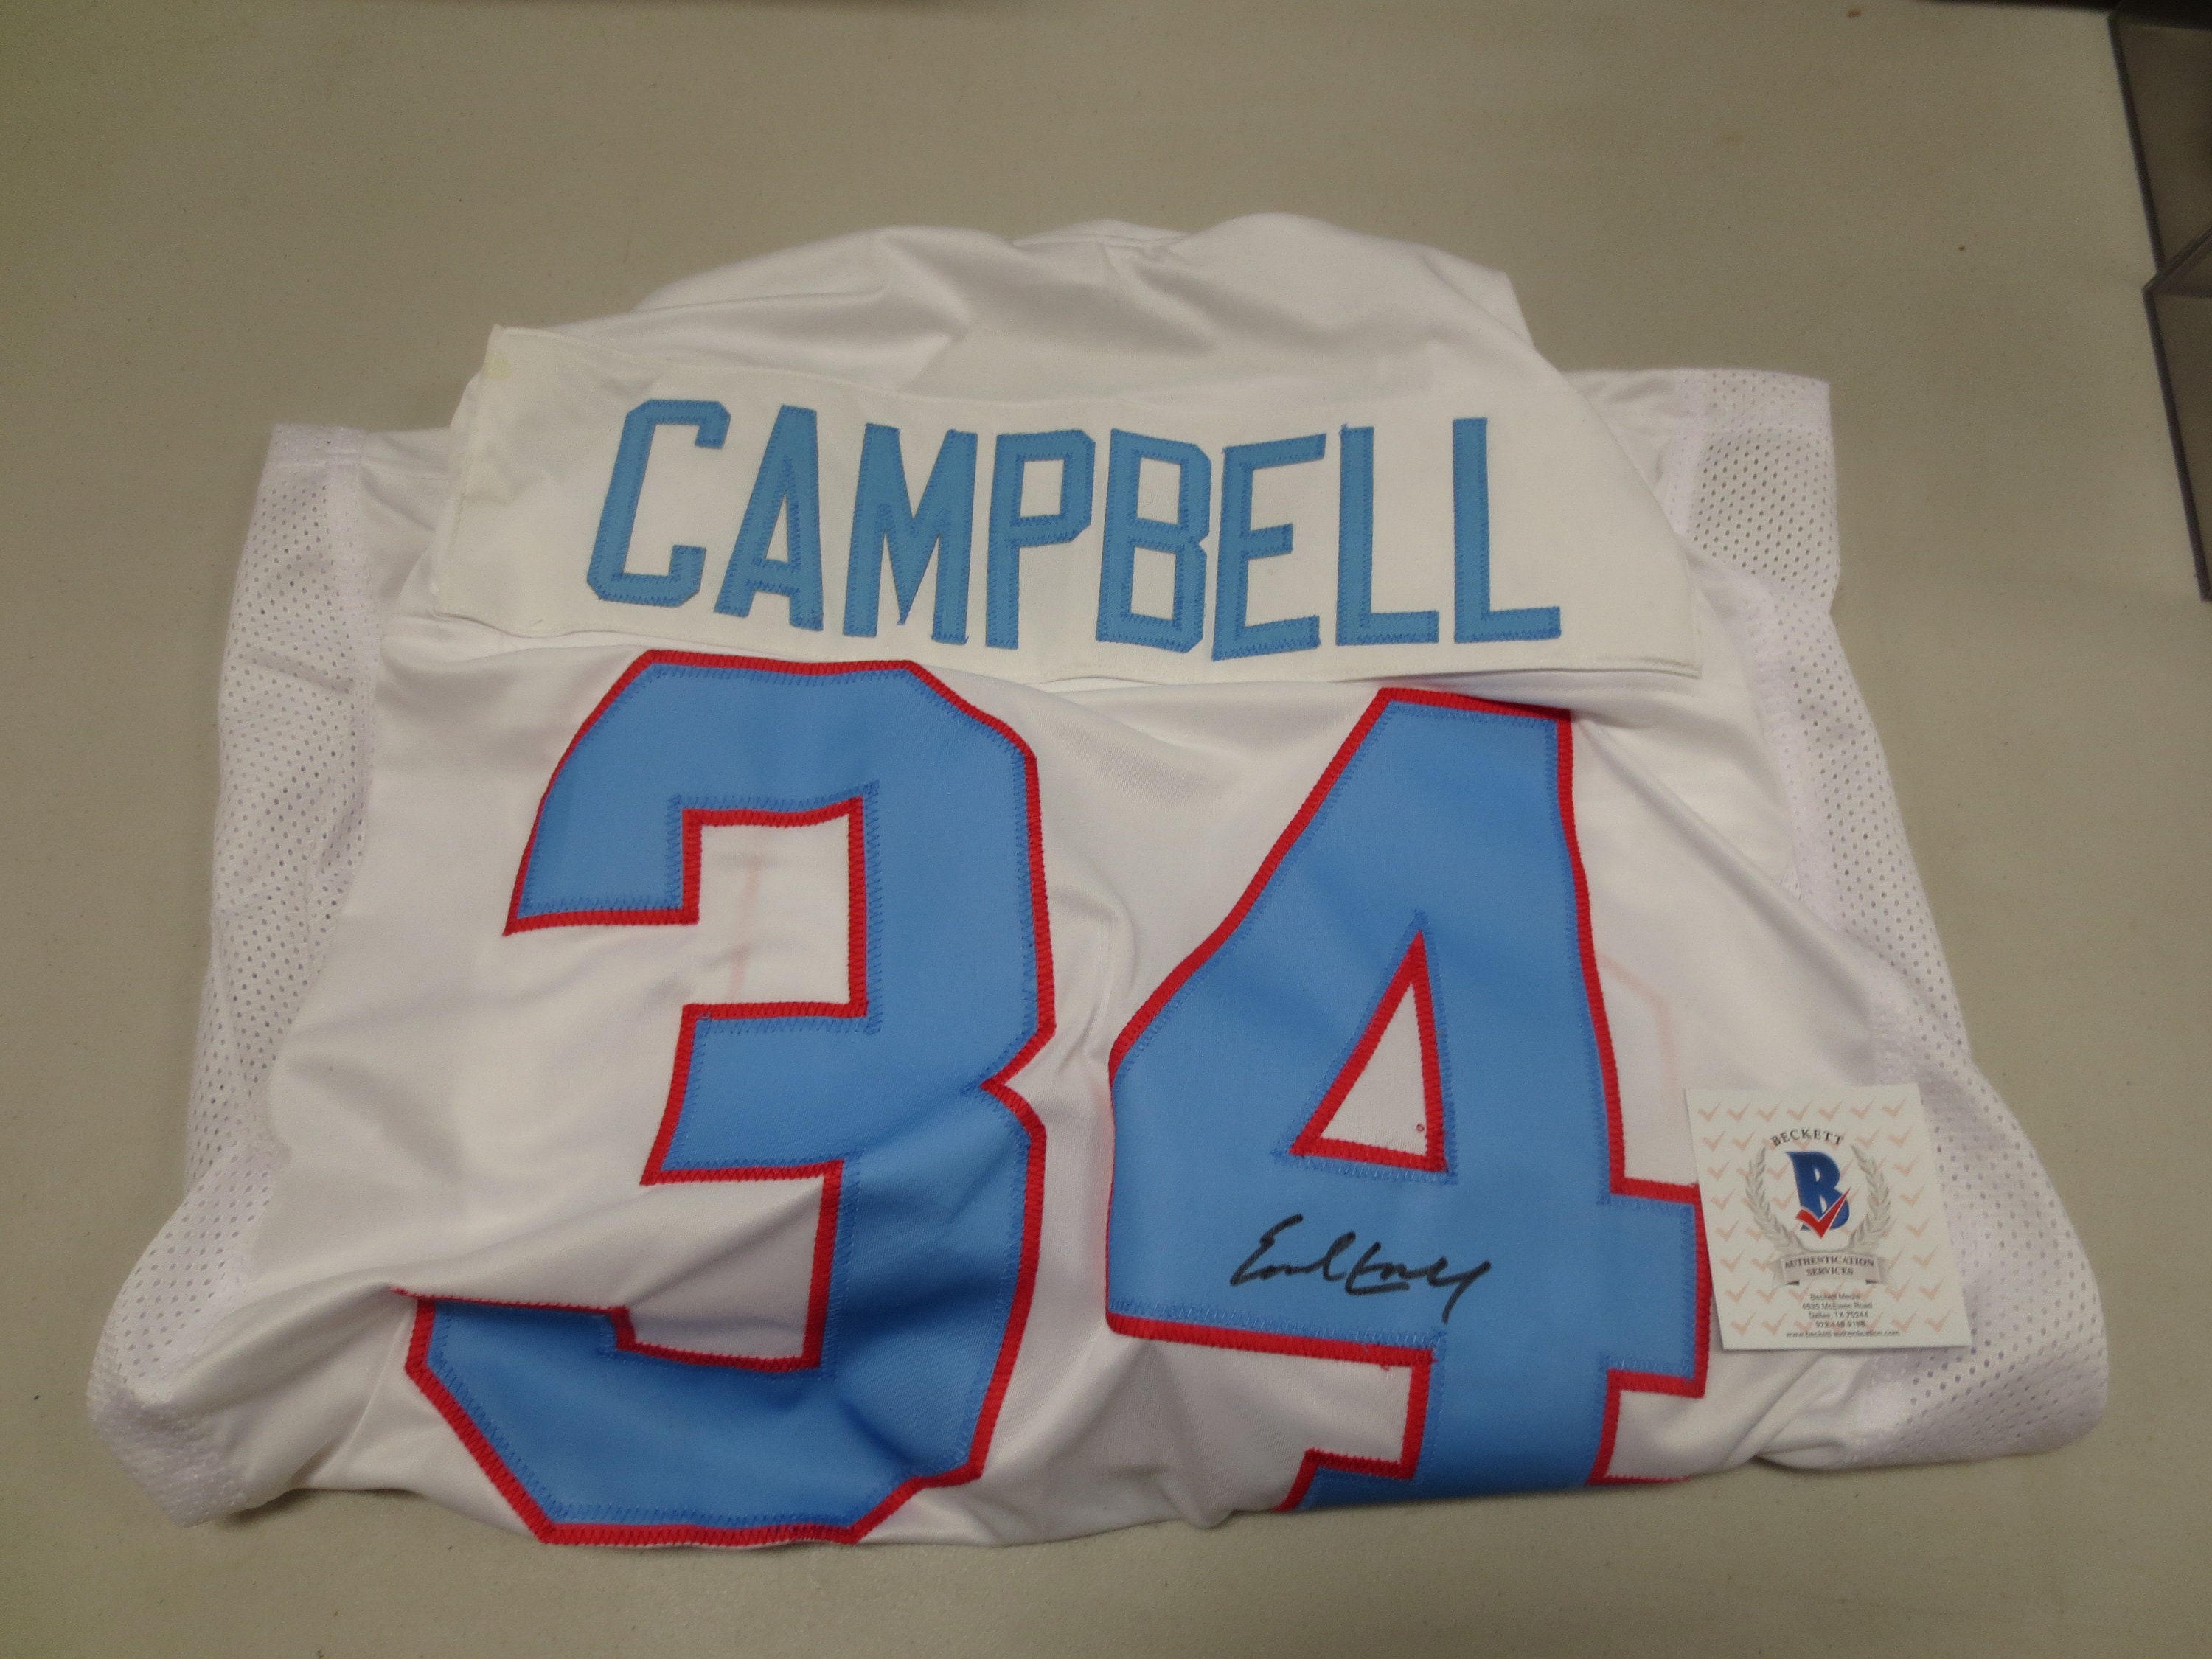 EARL CAMPBELL Photo Picture HOUSTON OILERS Football 8x10 11x14 or 11x17  (EC1)